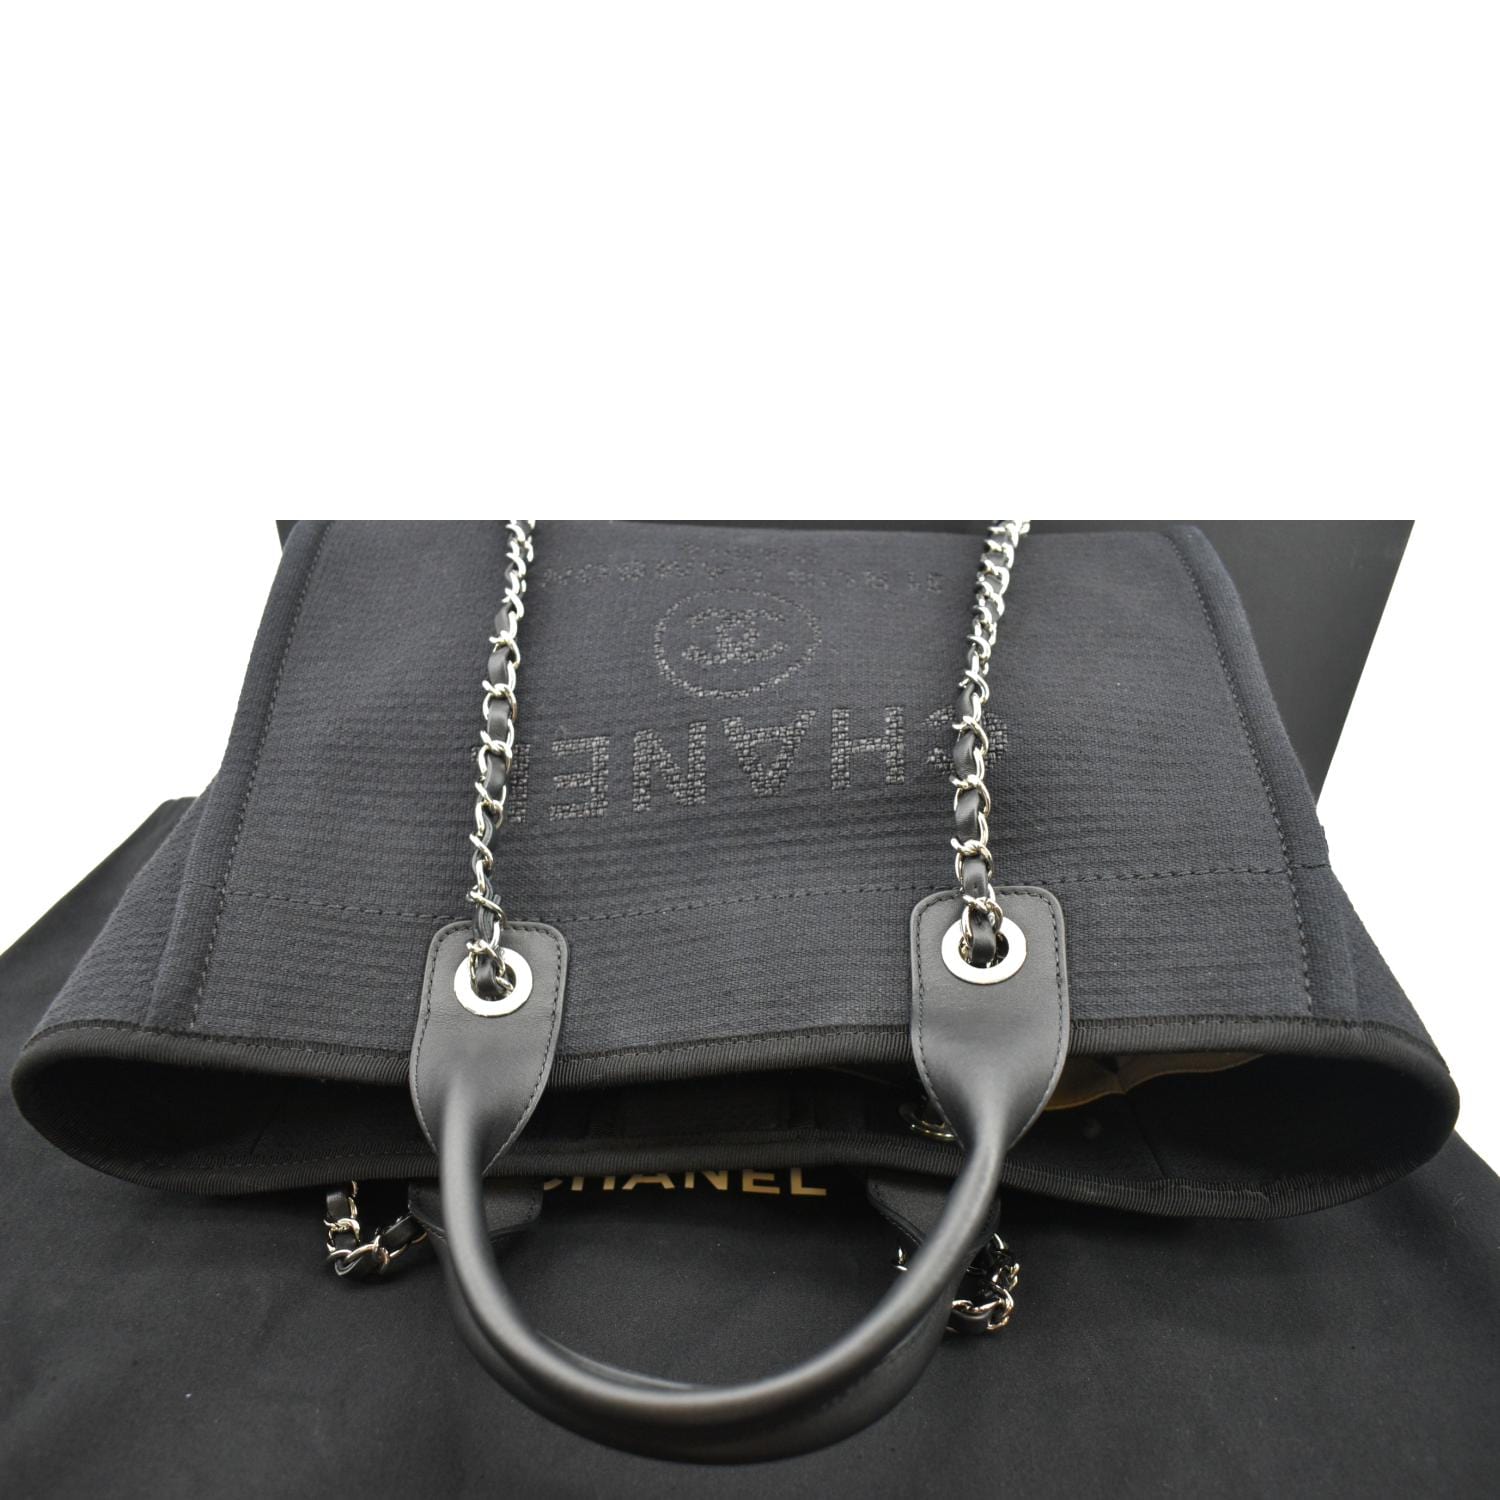 CHANEL Tote Bag Deauville PM canvas/leather gray black Women Used